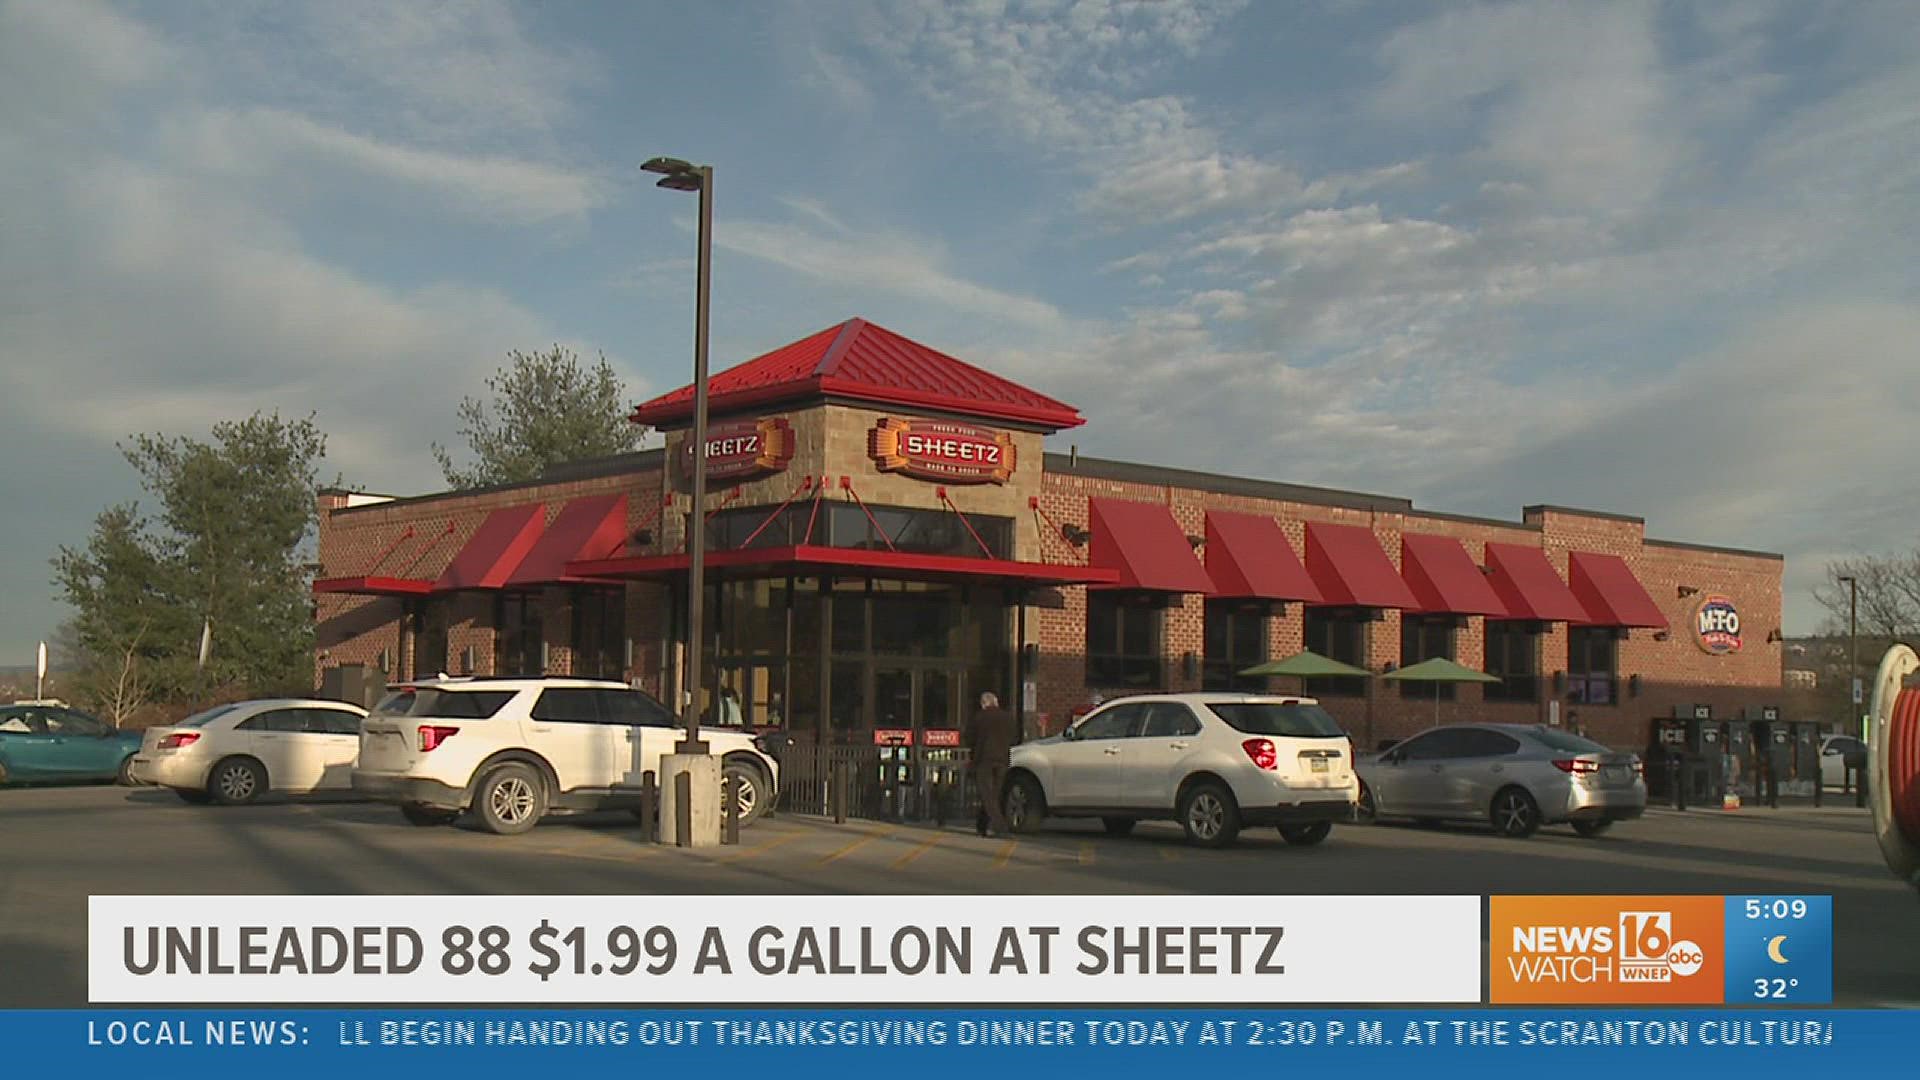 Unleaded 88 gas is available for $1.99 per gallon through Nov. 28 at Sheetz.